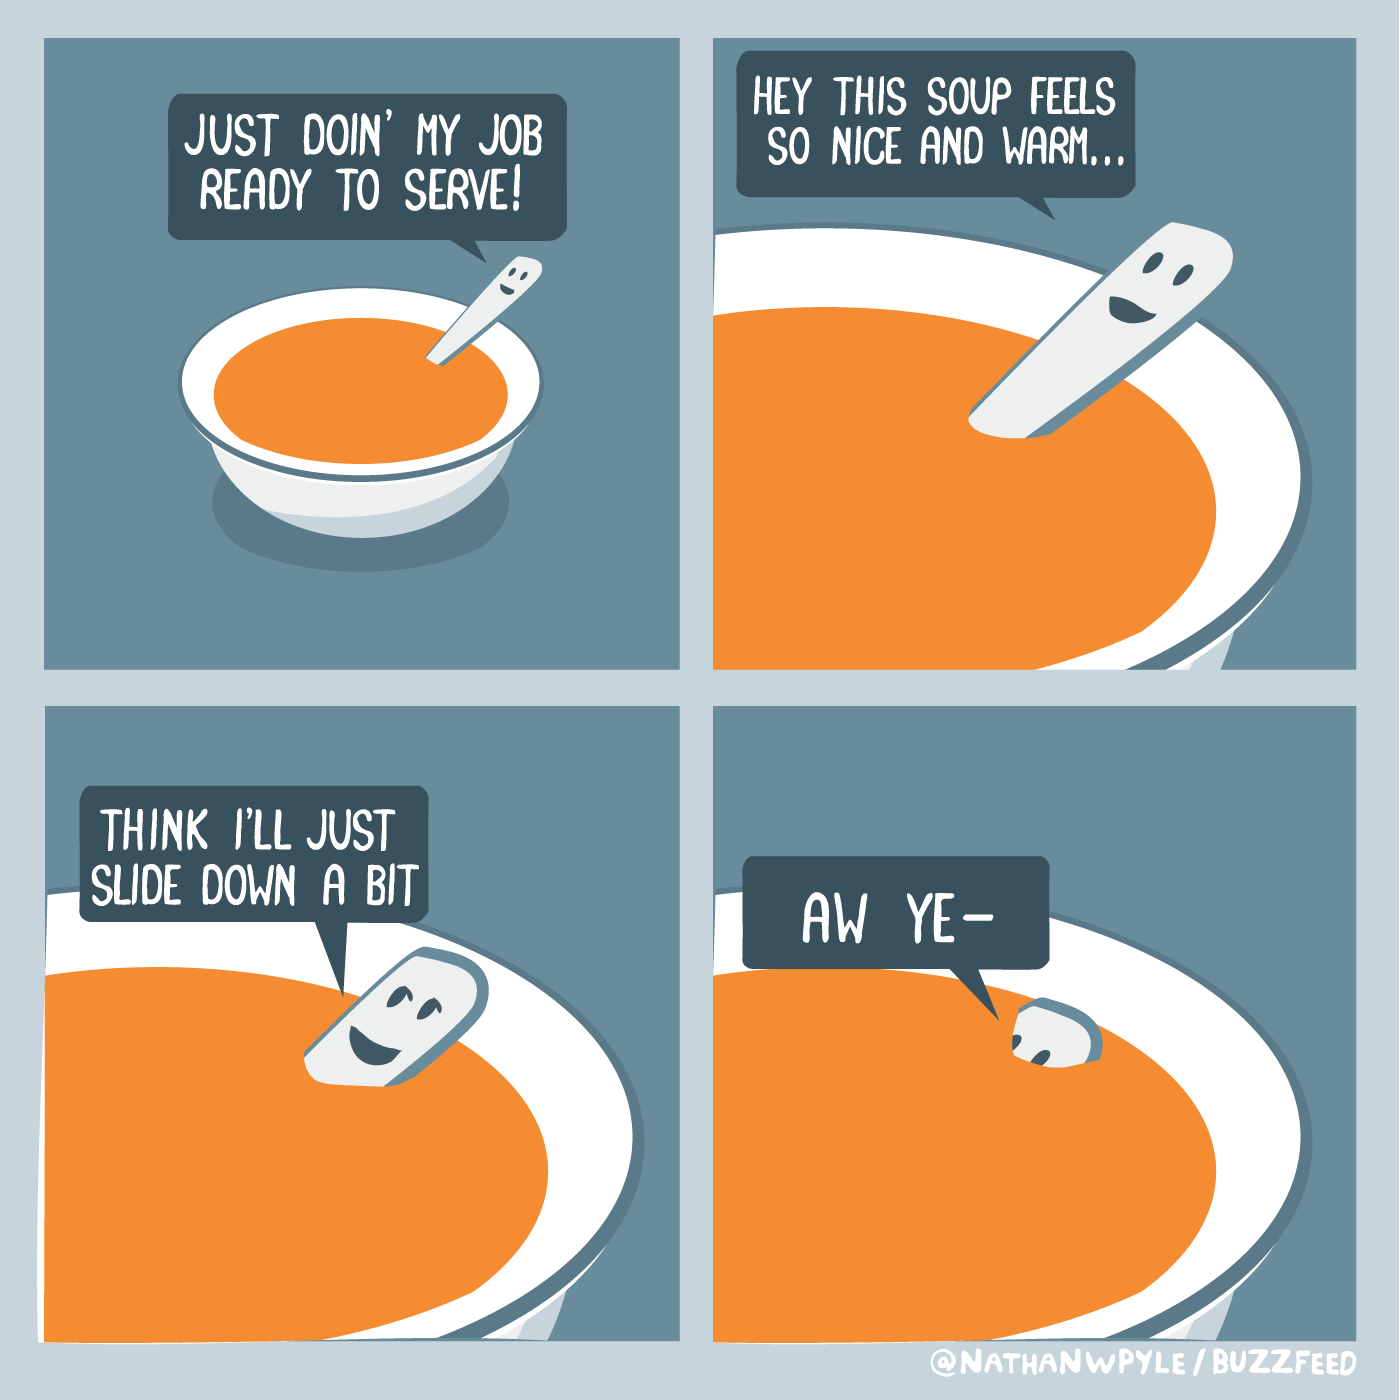 Soup Spoon Comic by nathanwpyle